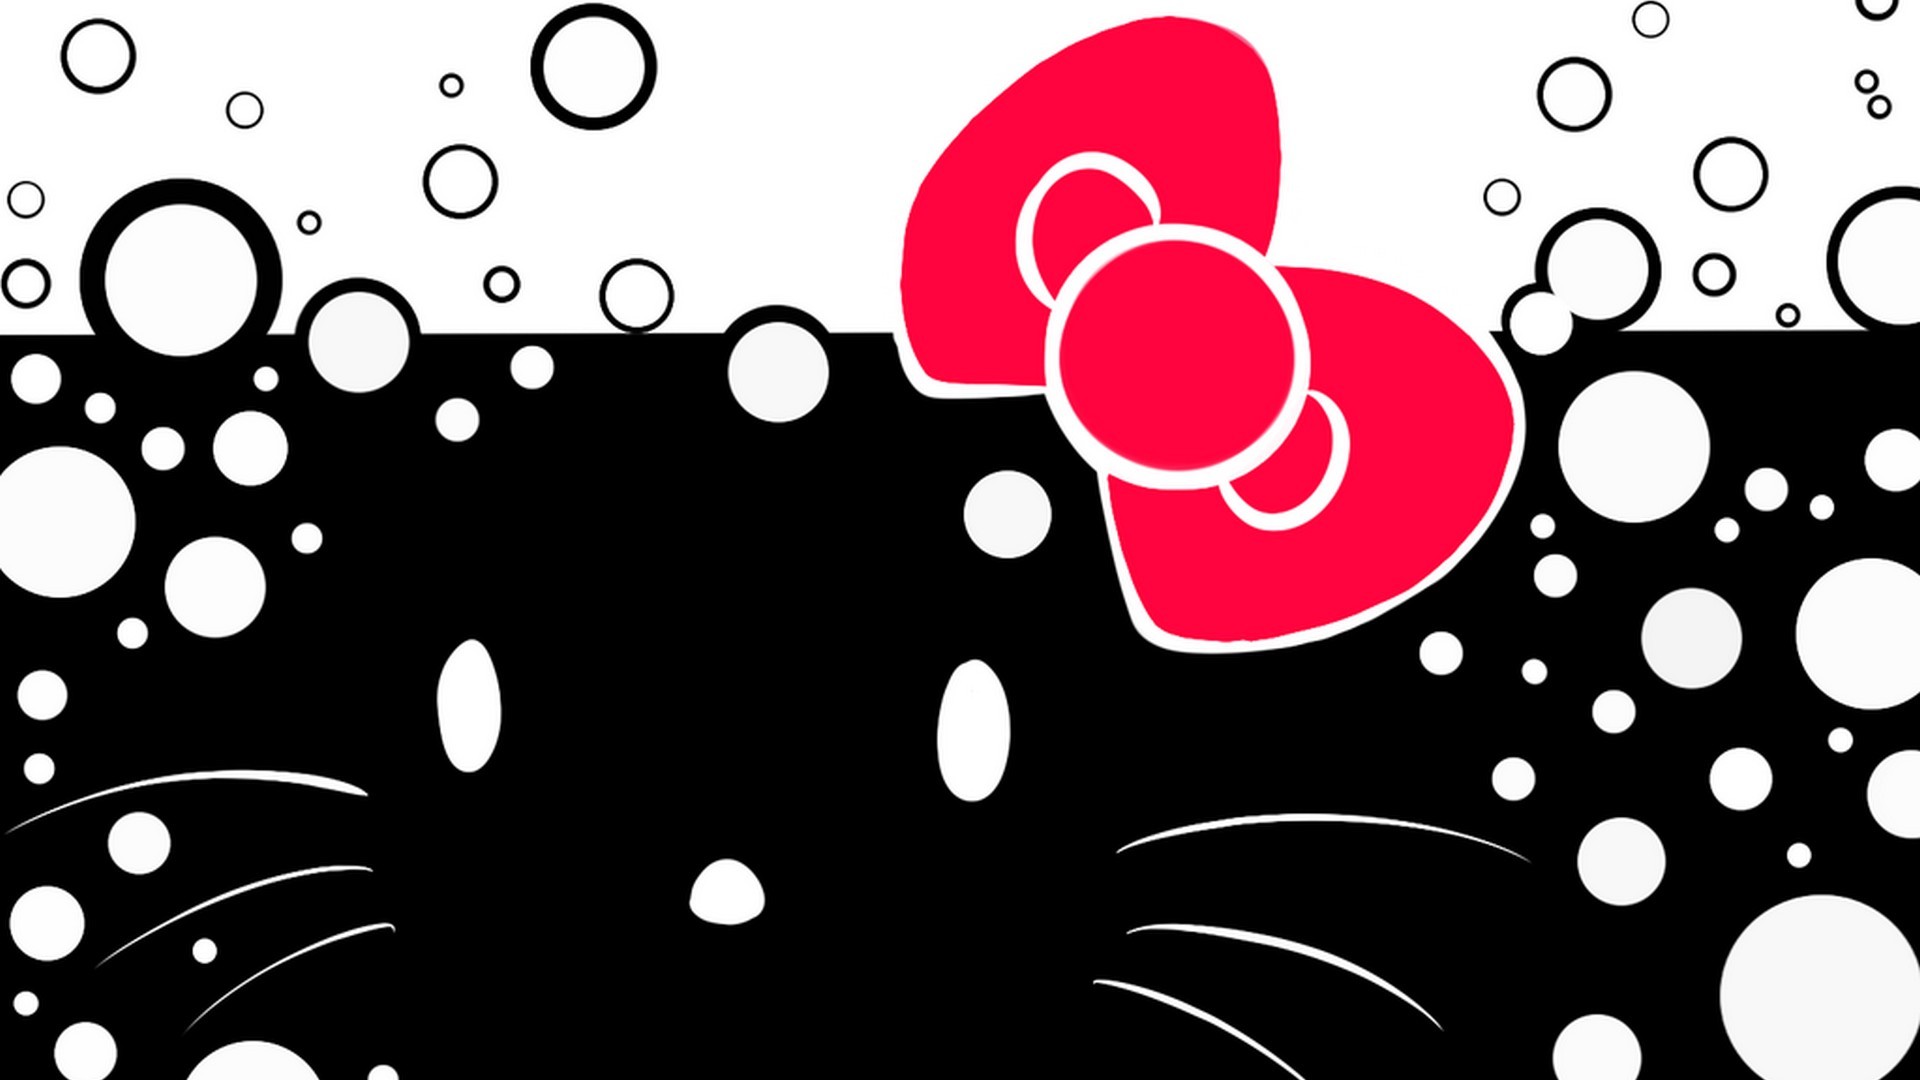 1920x1080 Hello Kitty Images HD Wallpaper with image resolution  pixel. You  can make this wallpaper